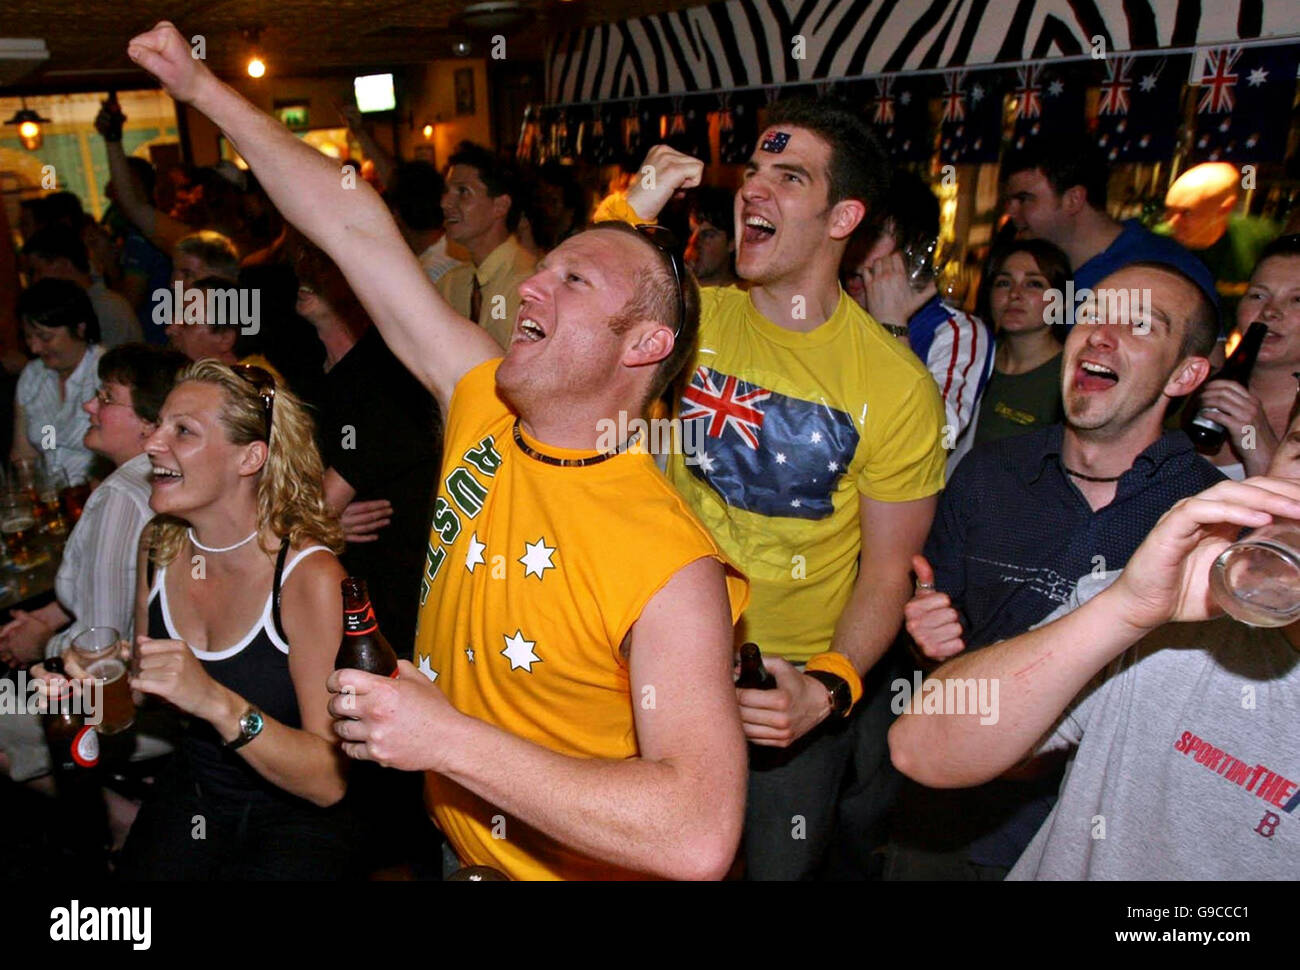 WORLDCUP Australia fans. Austrailian fans cheer on their team against Japan at the Whool Shed Pub in Dublin. Stock Photo